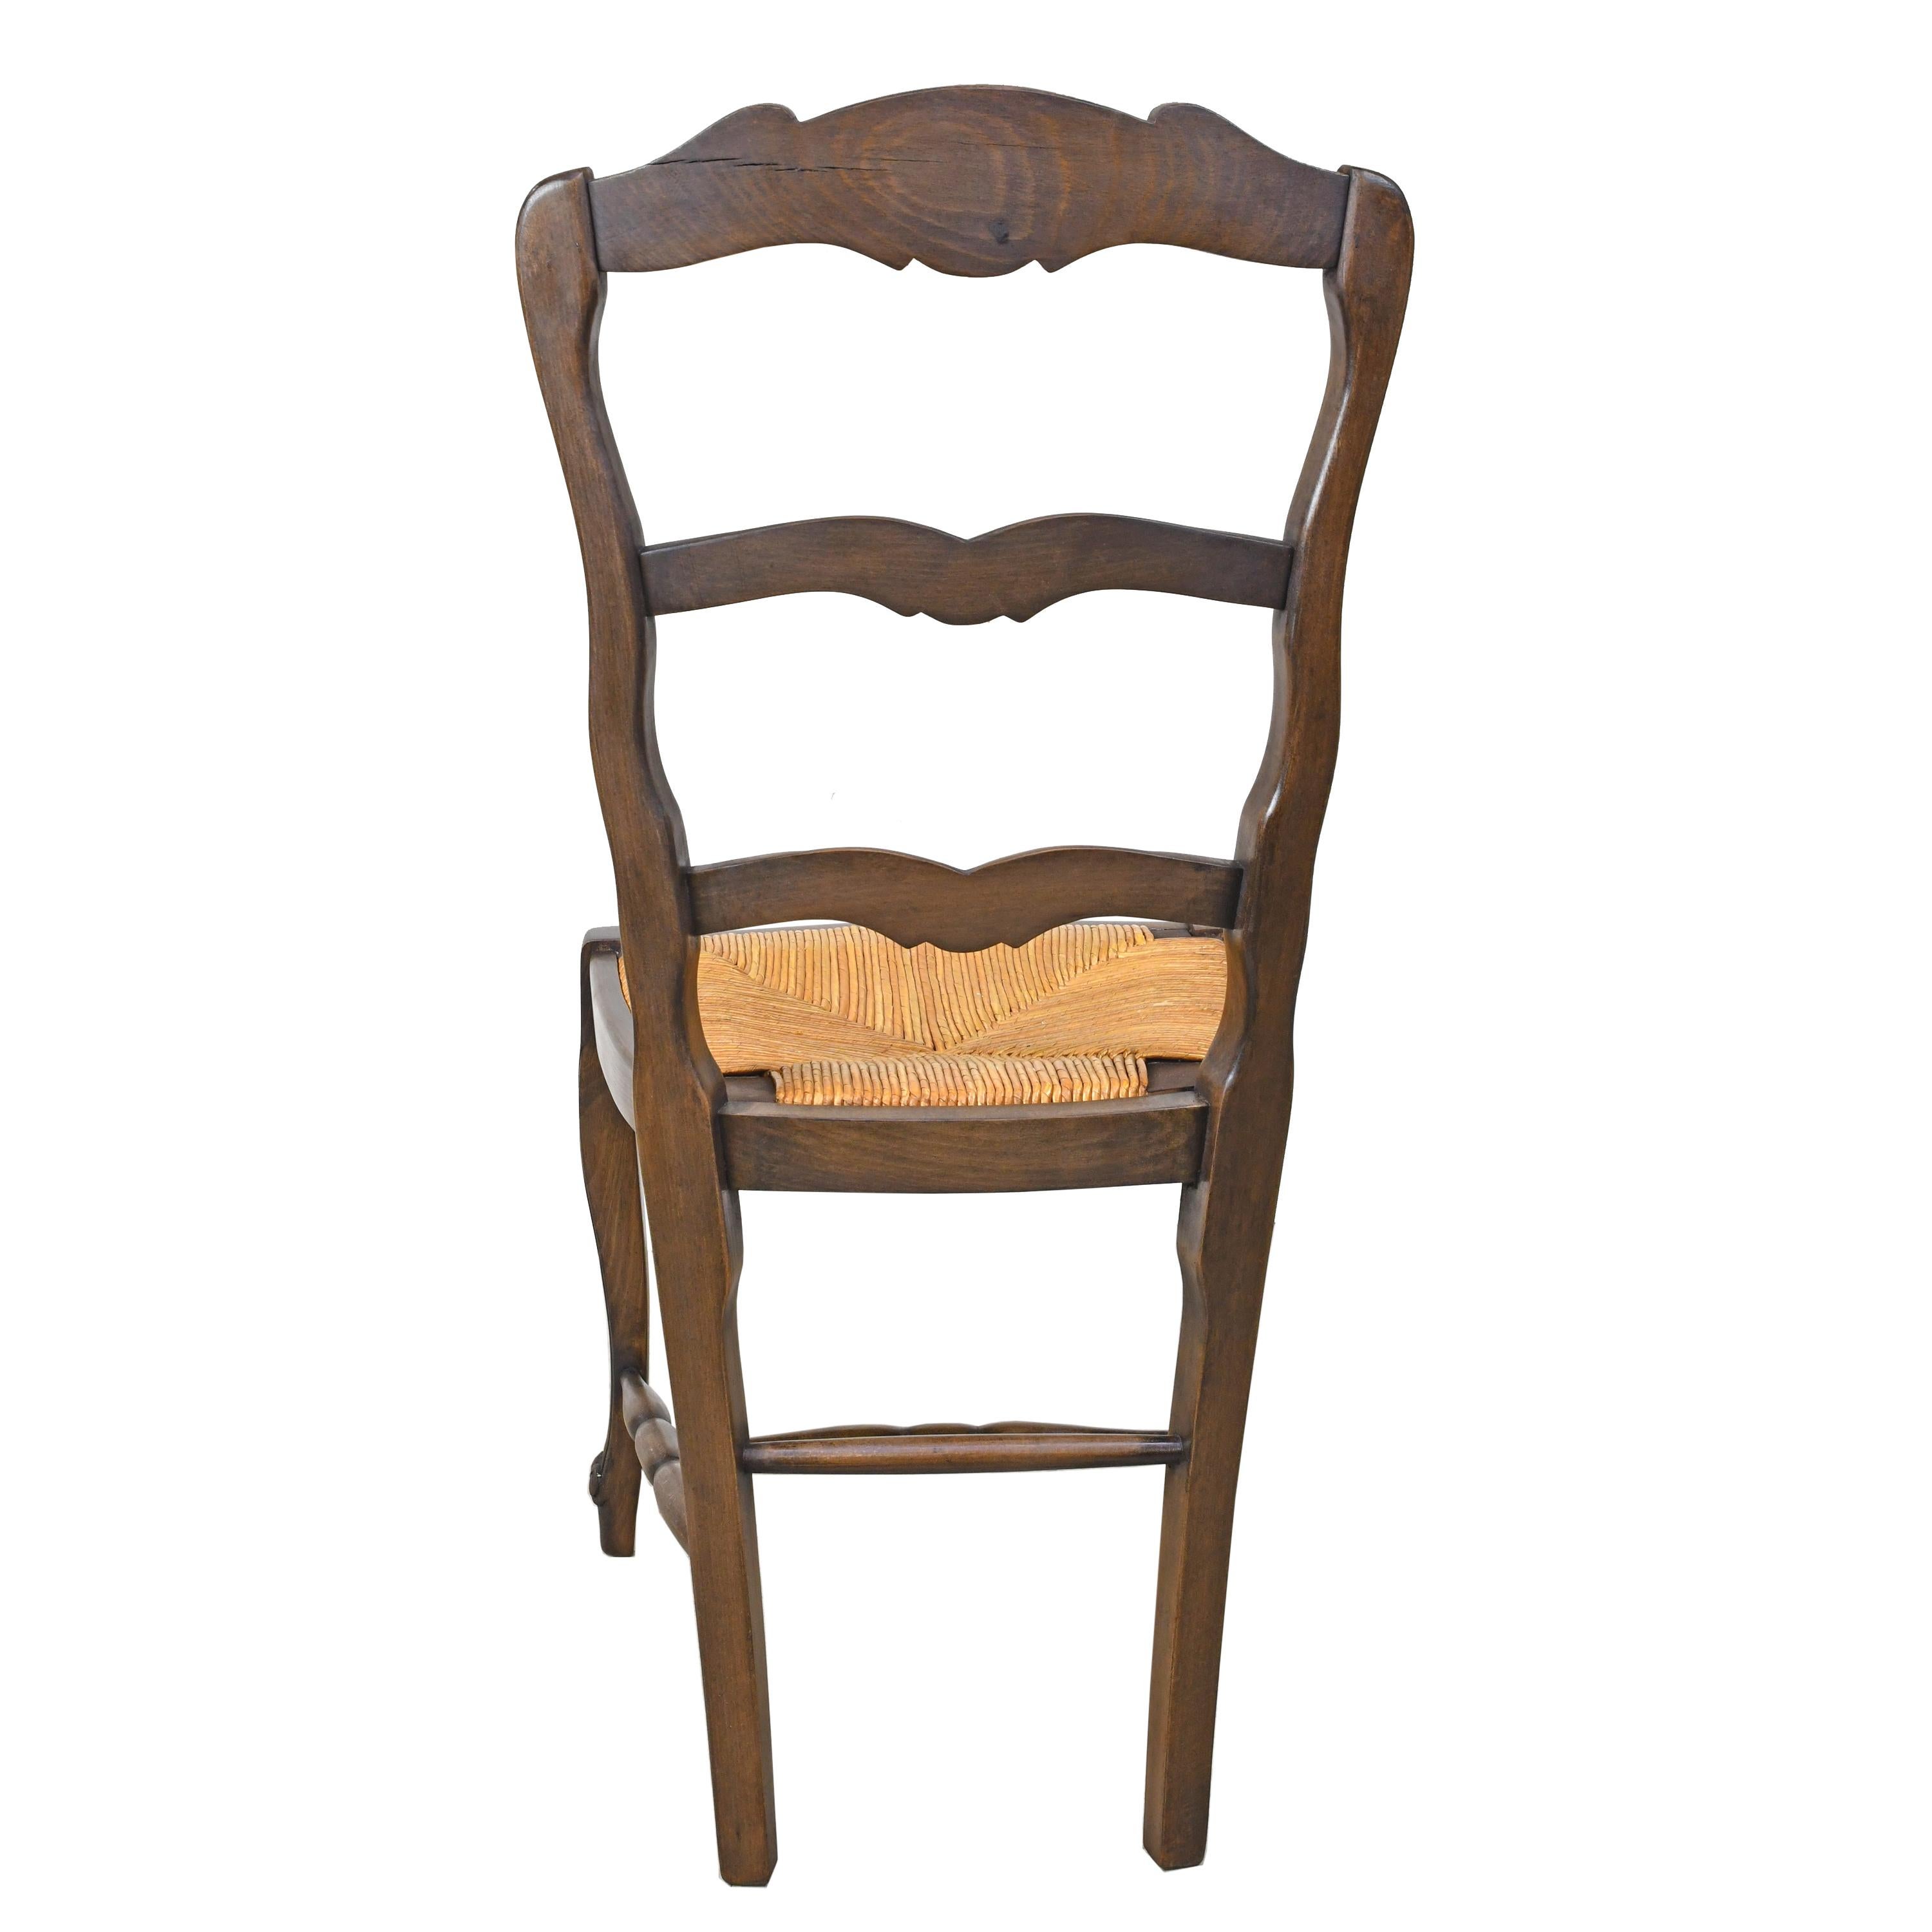 20th Century Set of 6 Provincial French Ladder Back Chairs, in Walnut Finish, circa 1900-1920